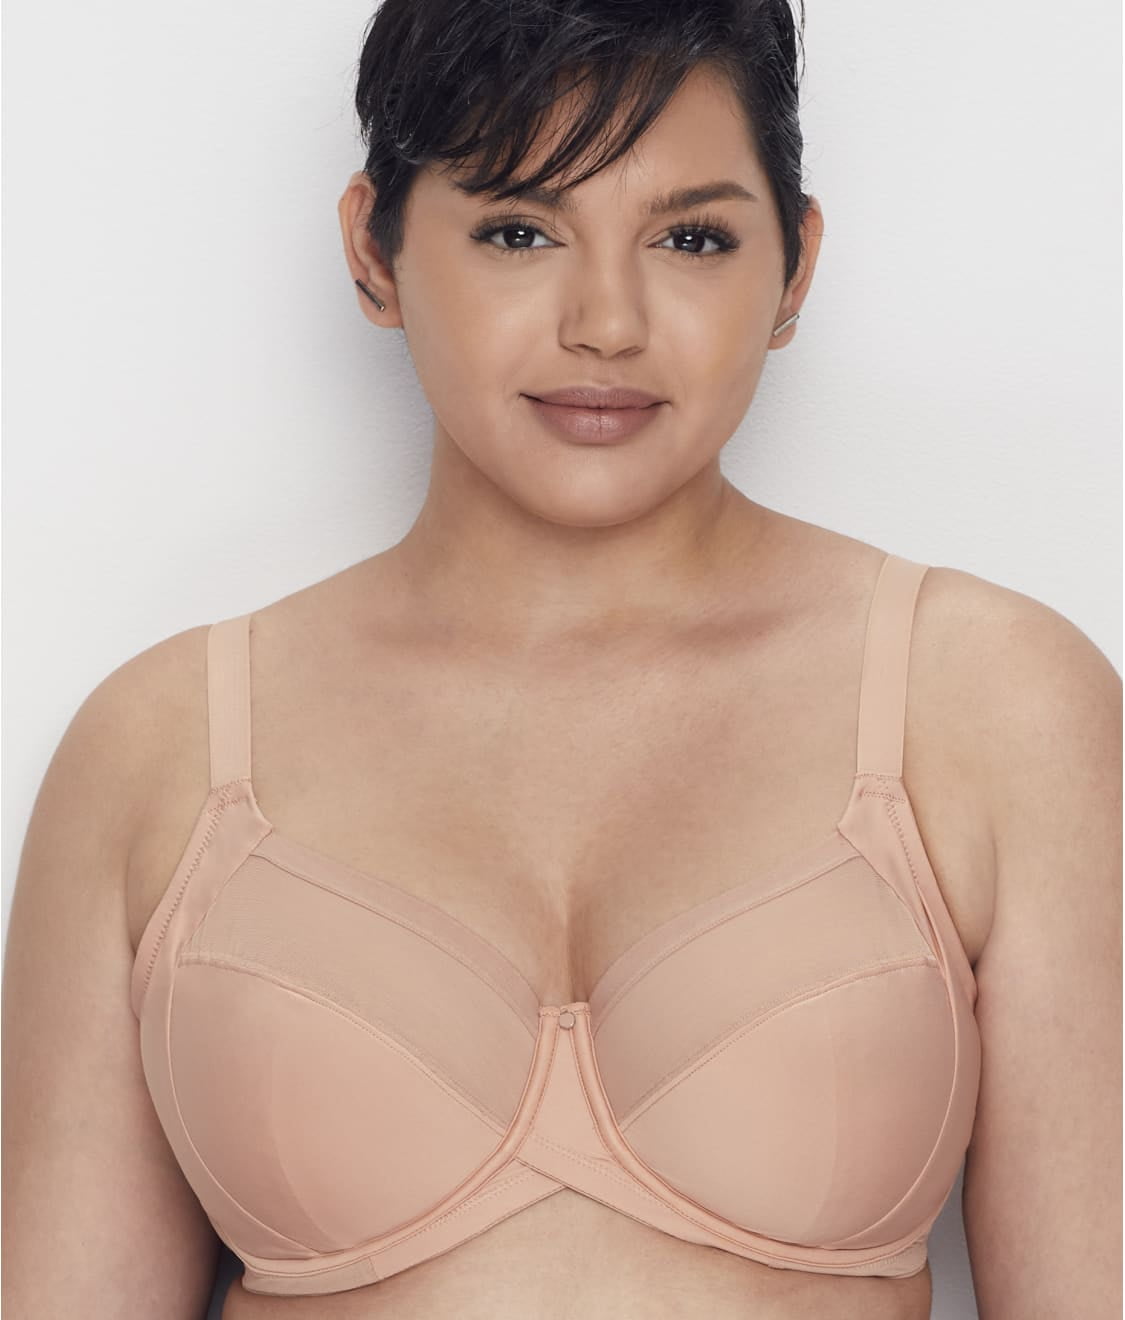 Natural Curves - Bra & Briefs up to L cup (UK I cup)